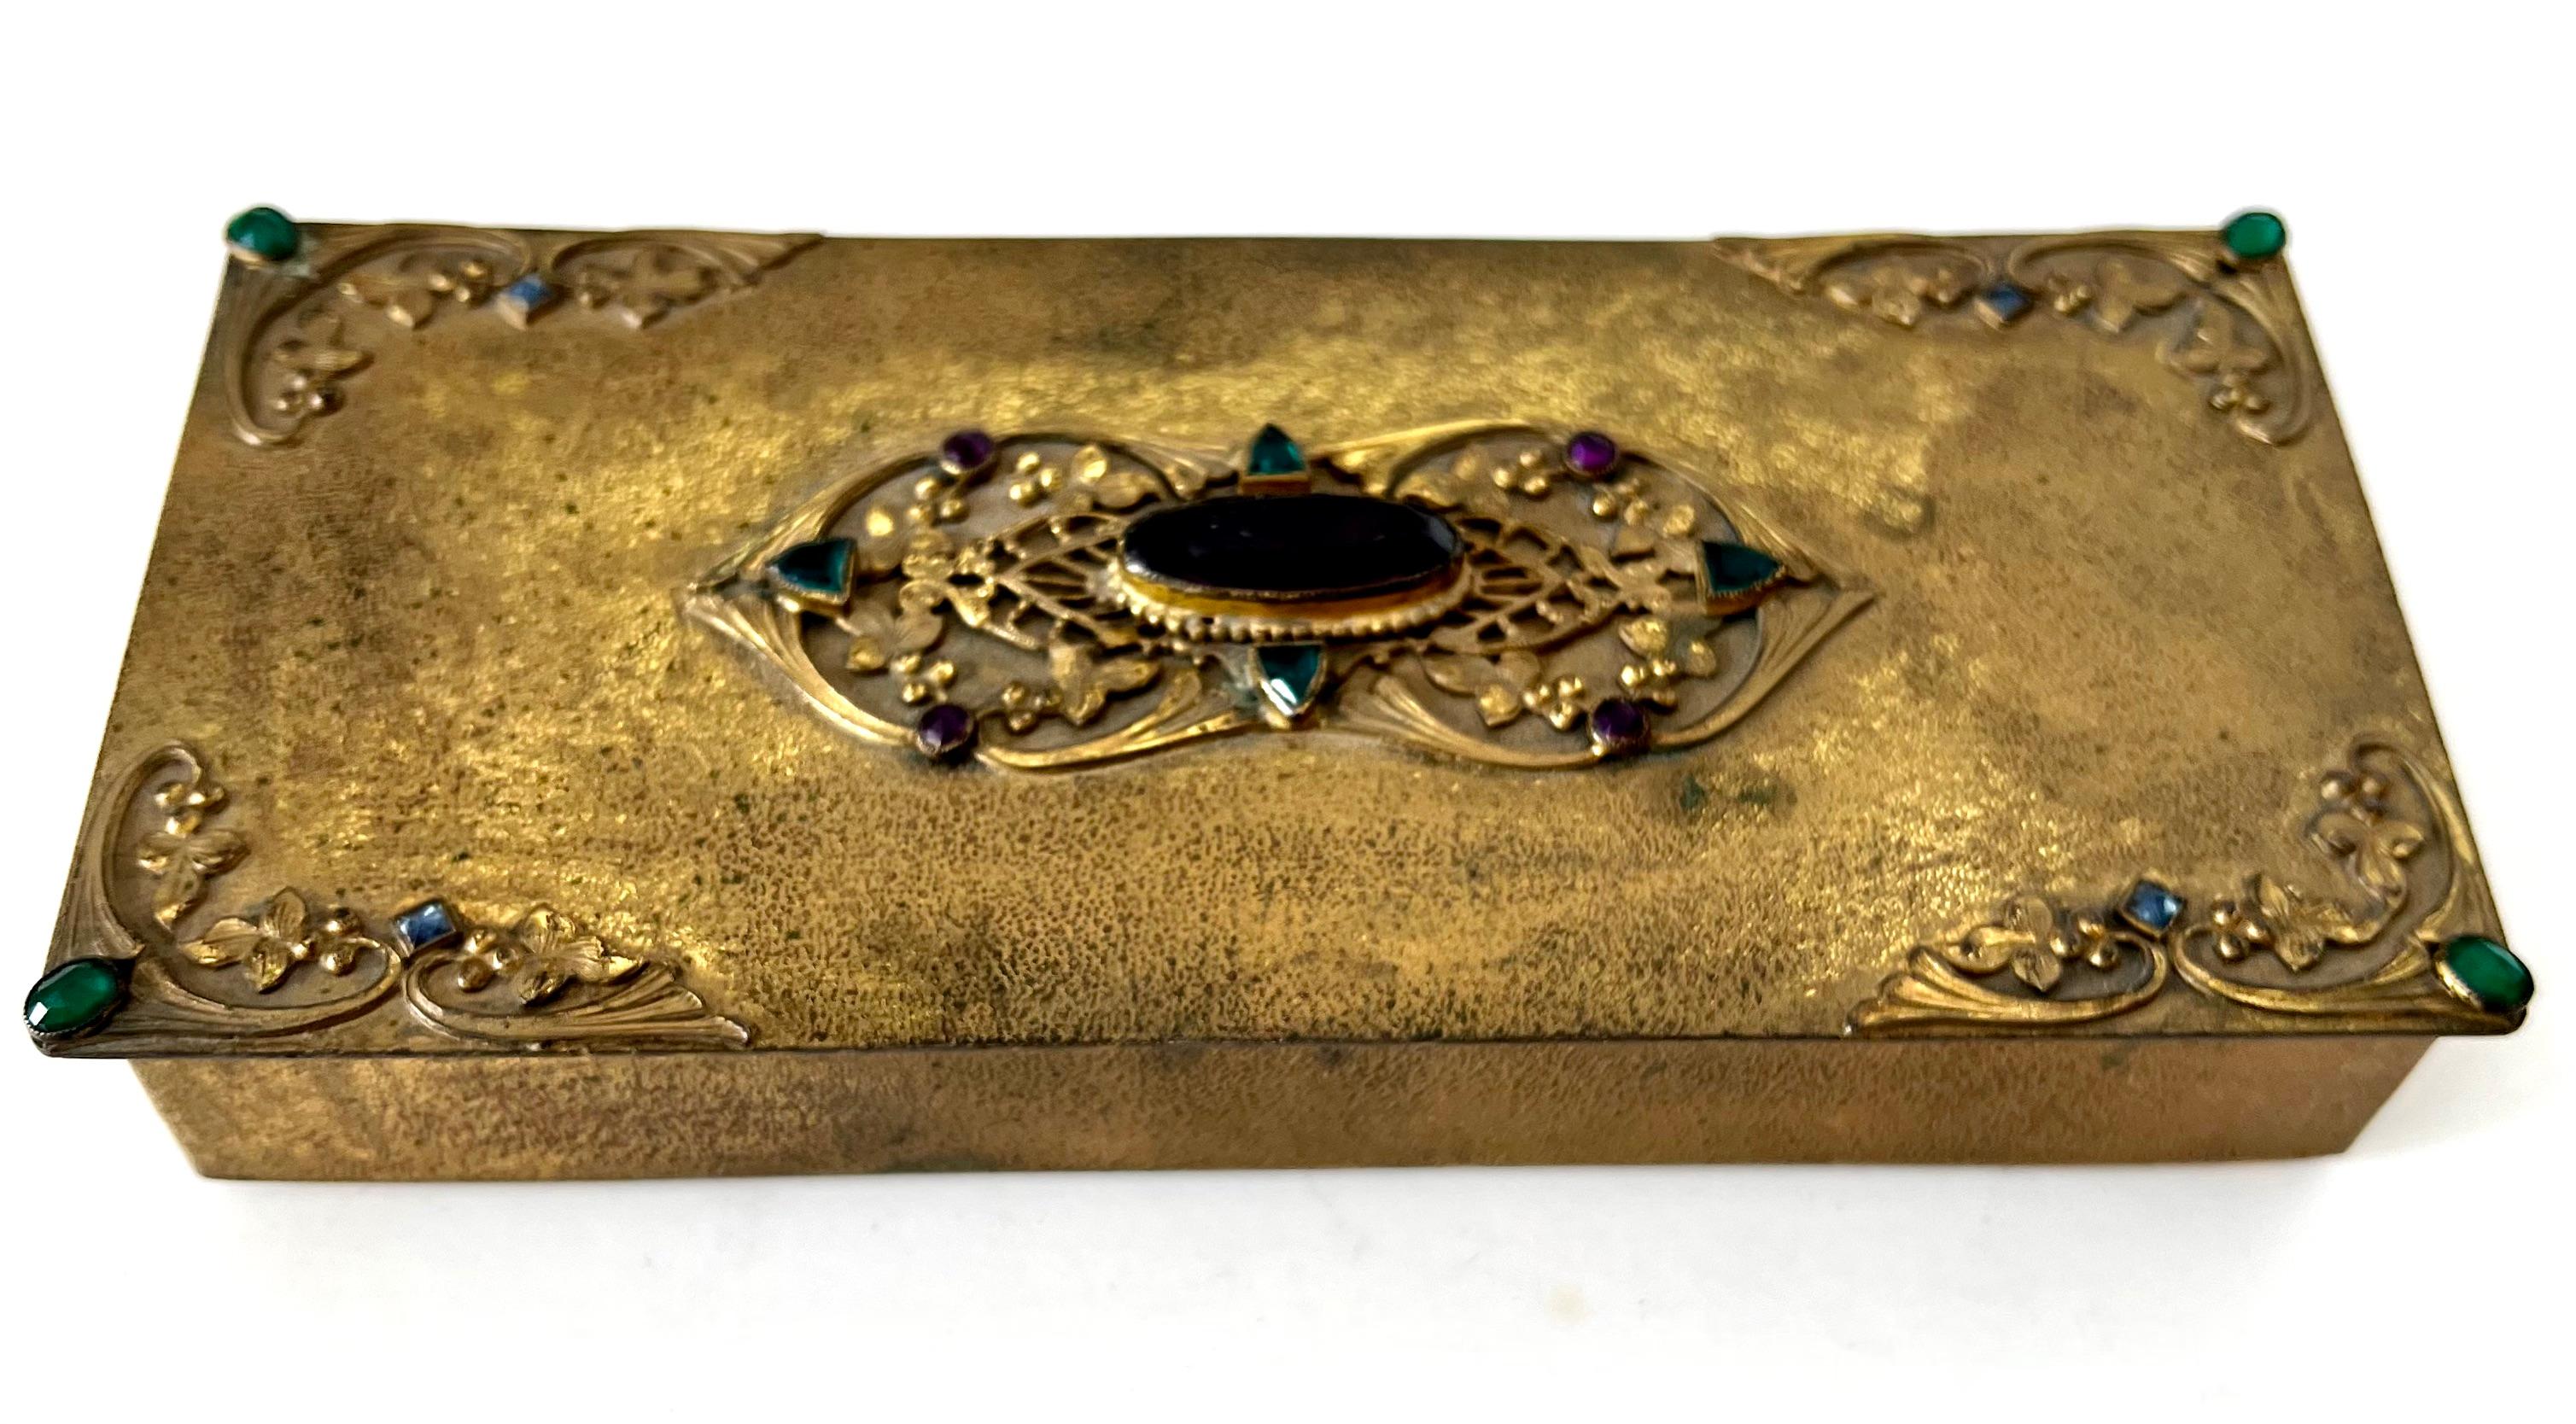 Empire Art Gold Box with Decorative hinged Lid and Jewels 1920 For Sale 2